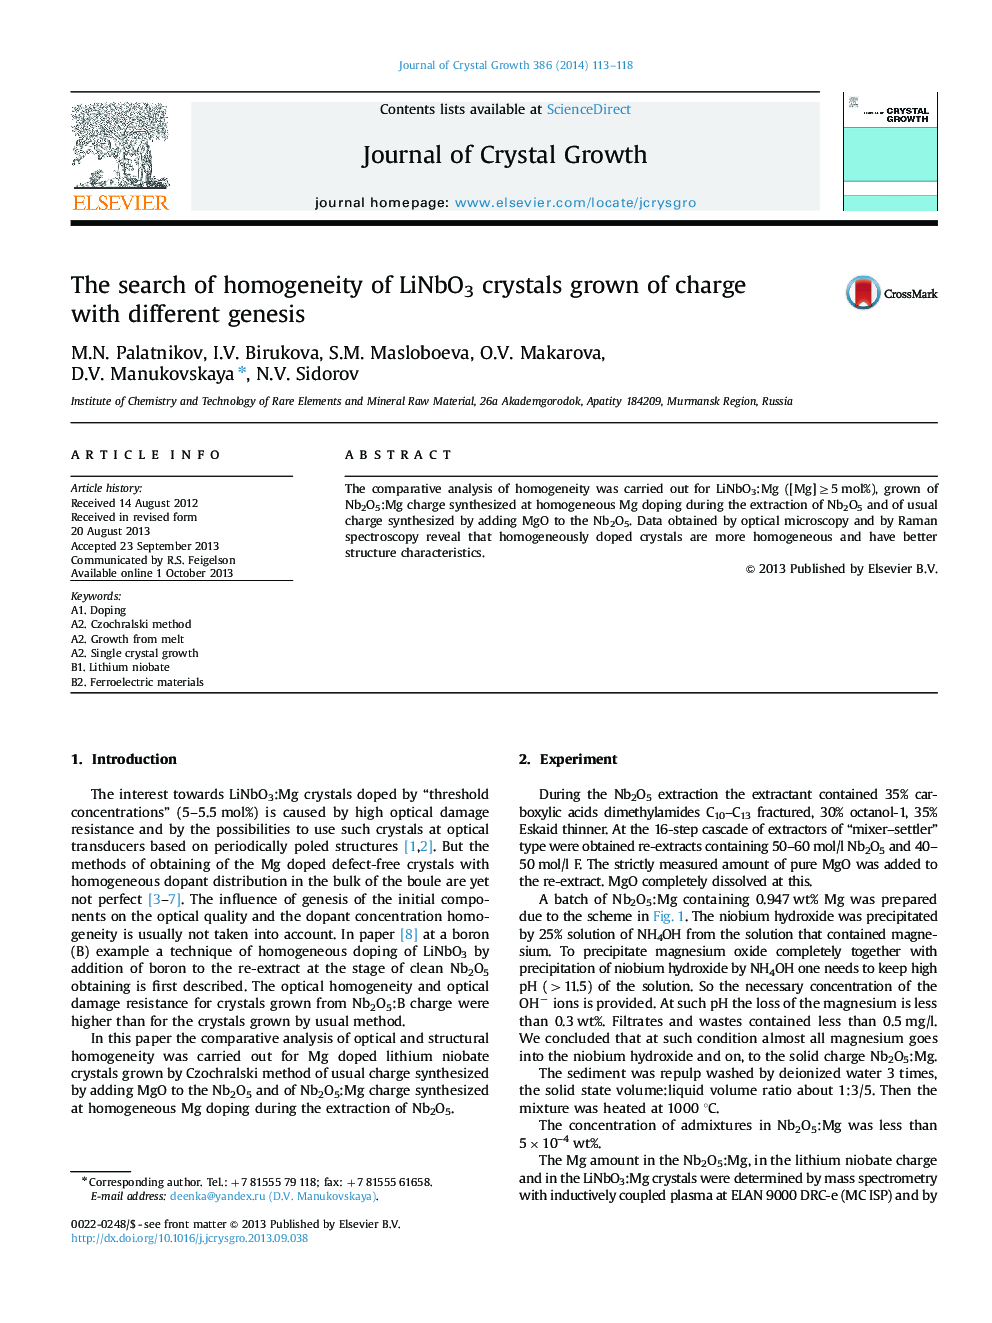 The search of homogeneity of LiNbO3 crystals grown of charge with different genesis